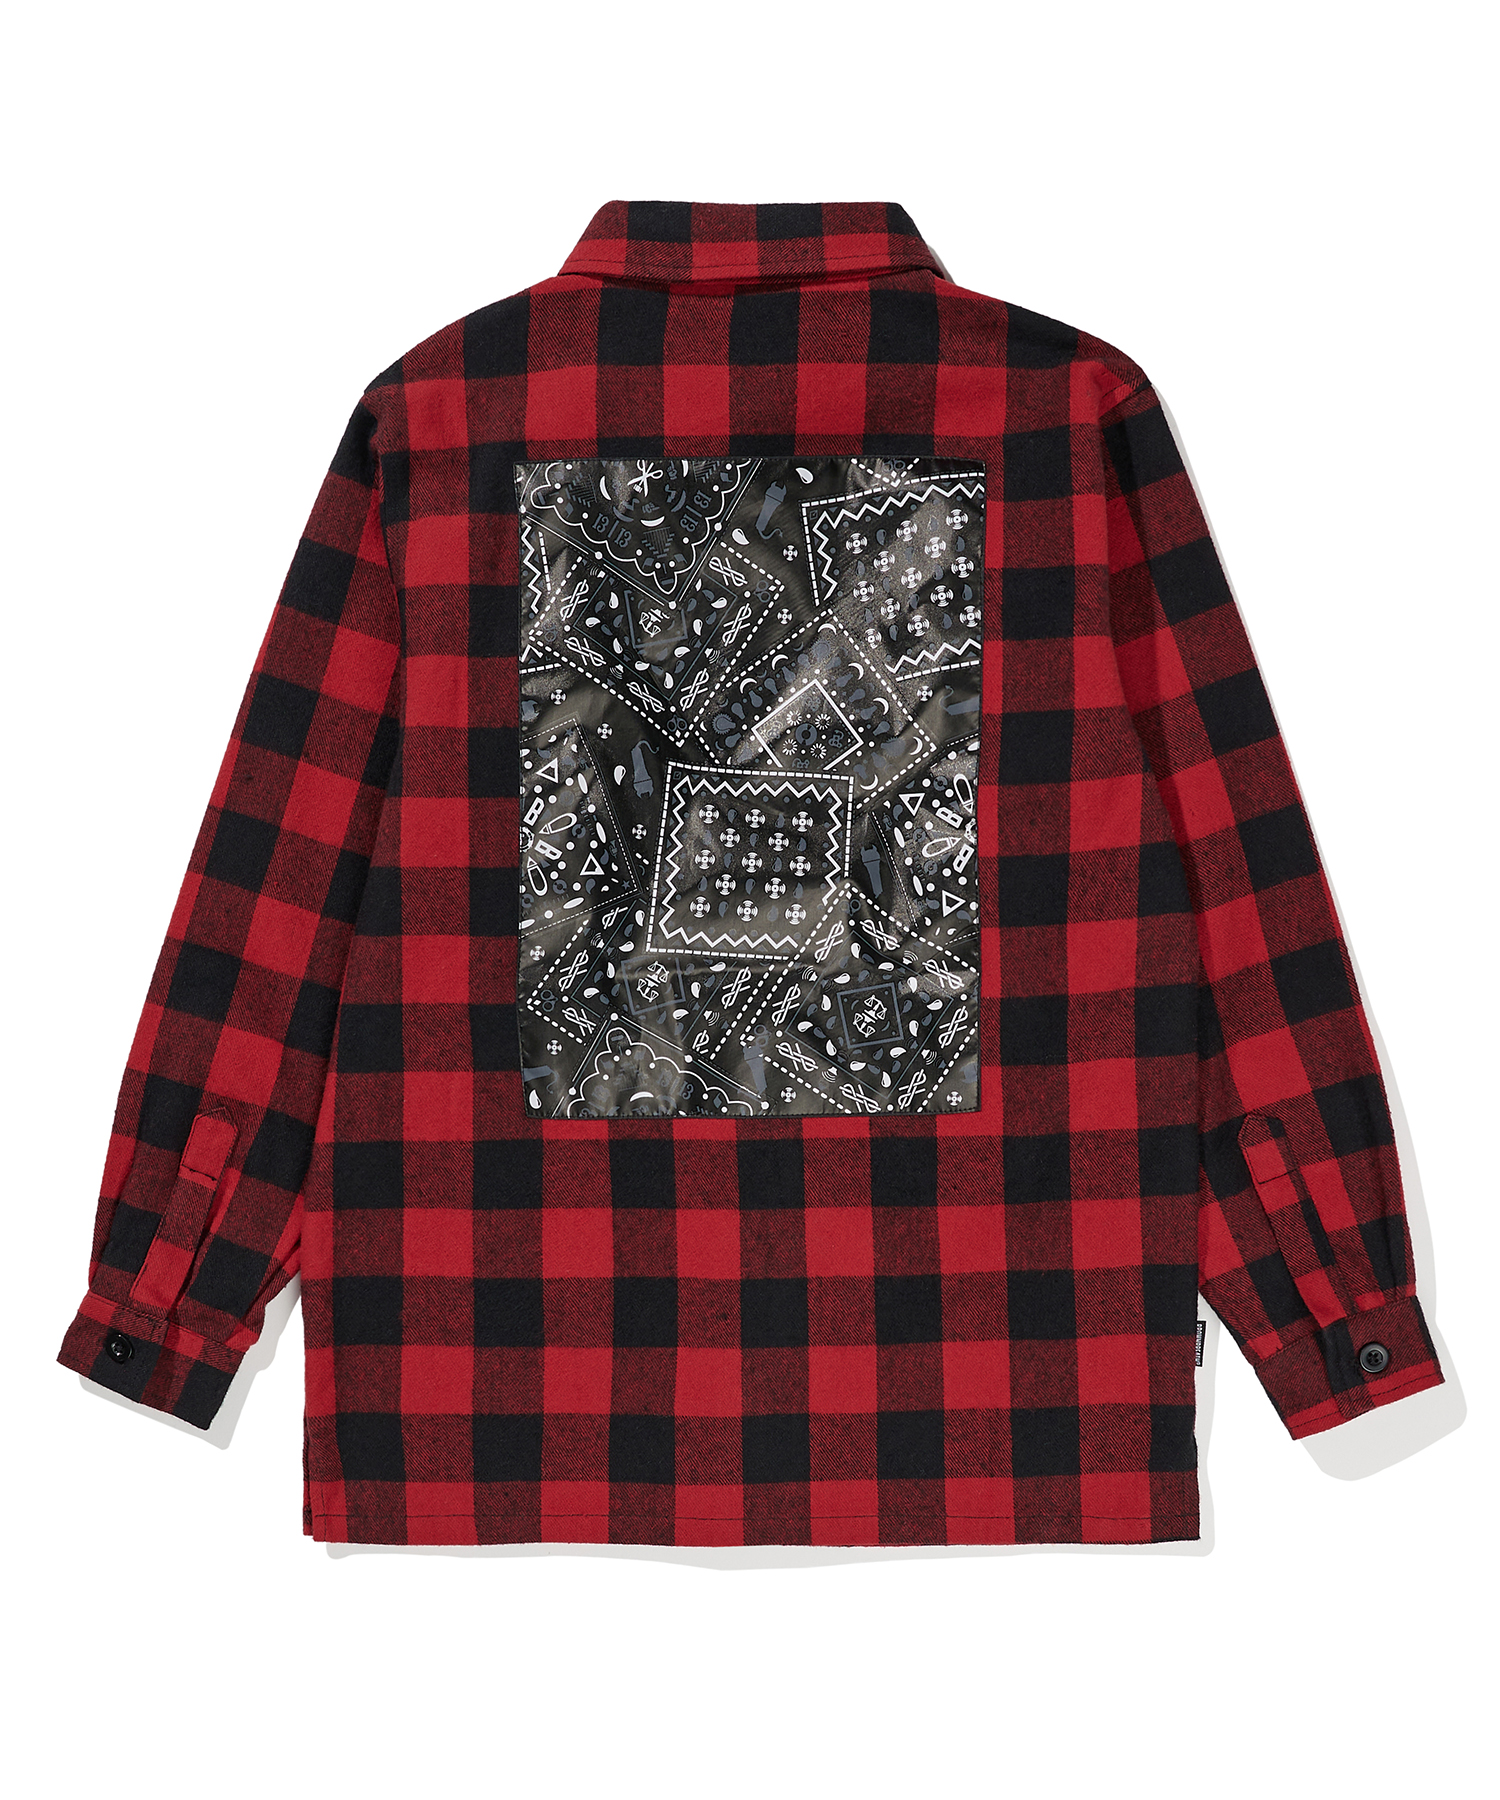 KIDS PAISELY CHECK SHIRTS - RED